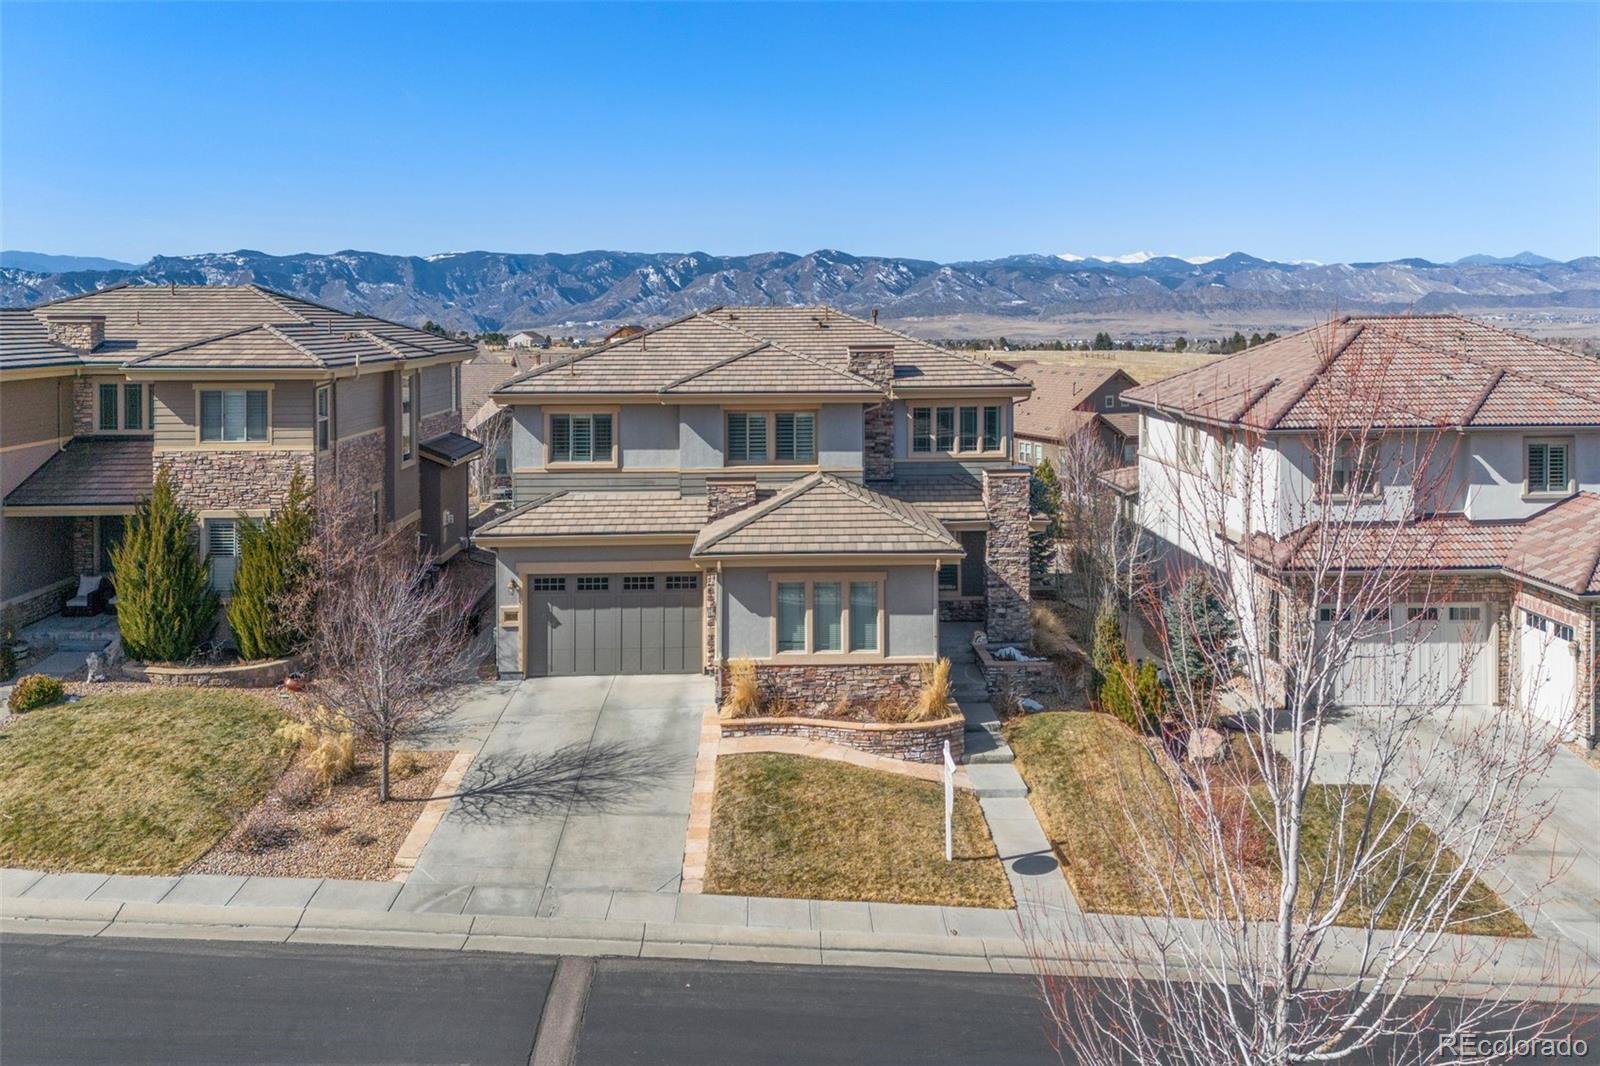 10831  manorstone drive, highlands ranch sold home. Closed on 2024-03-28 for $1,603,800.